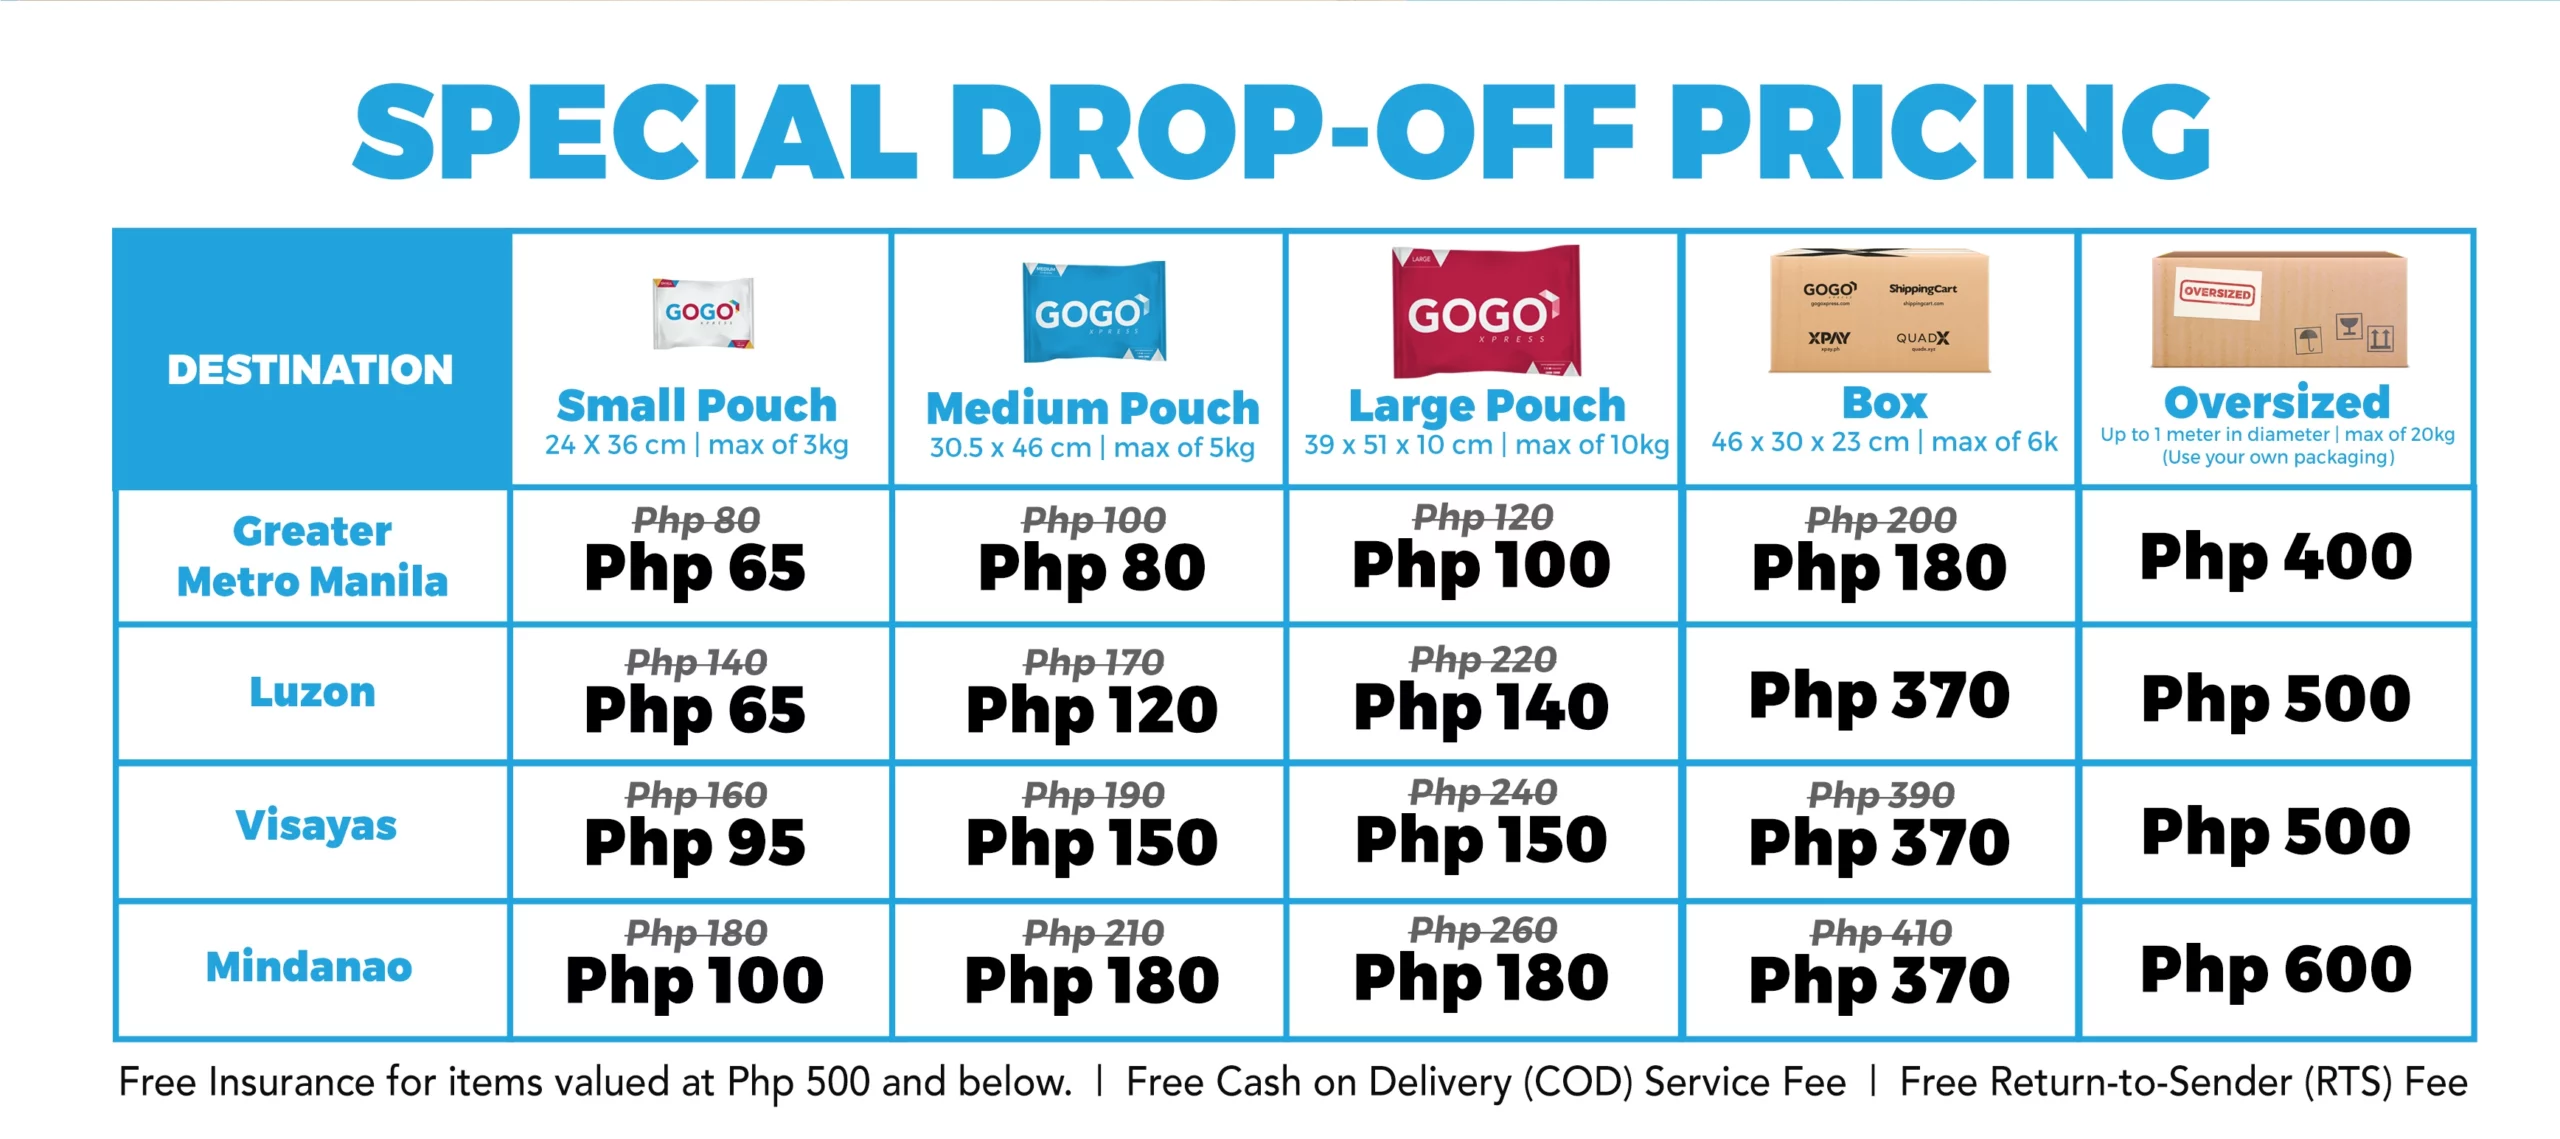 Special Pricing For Drop-Off Deliveries! | GoGo Xpress